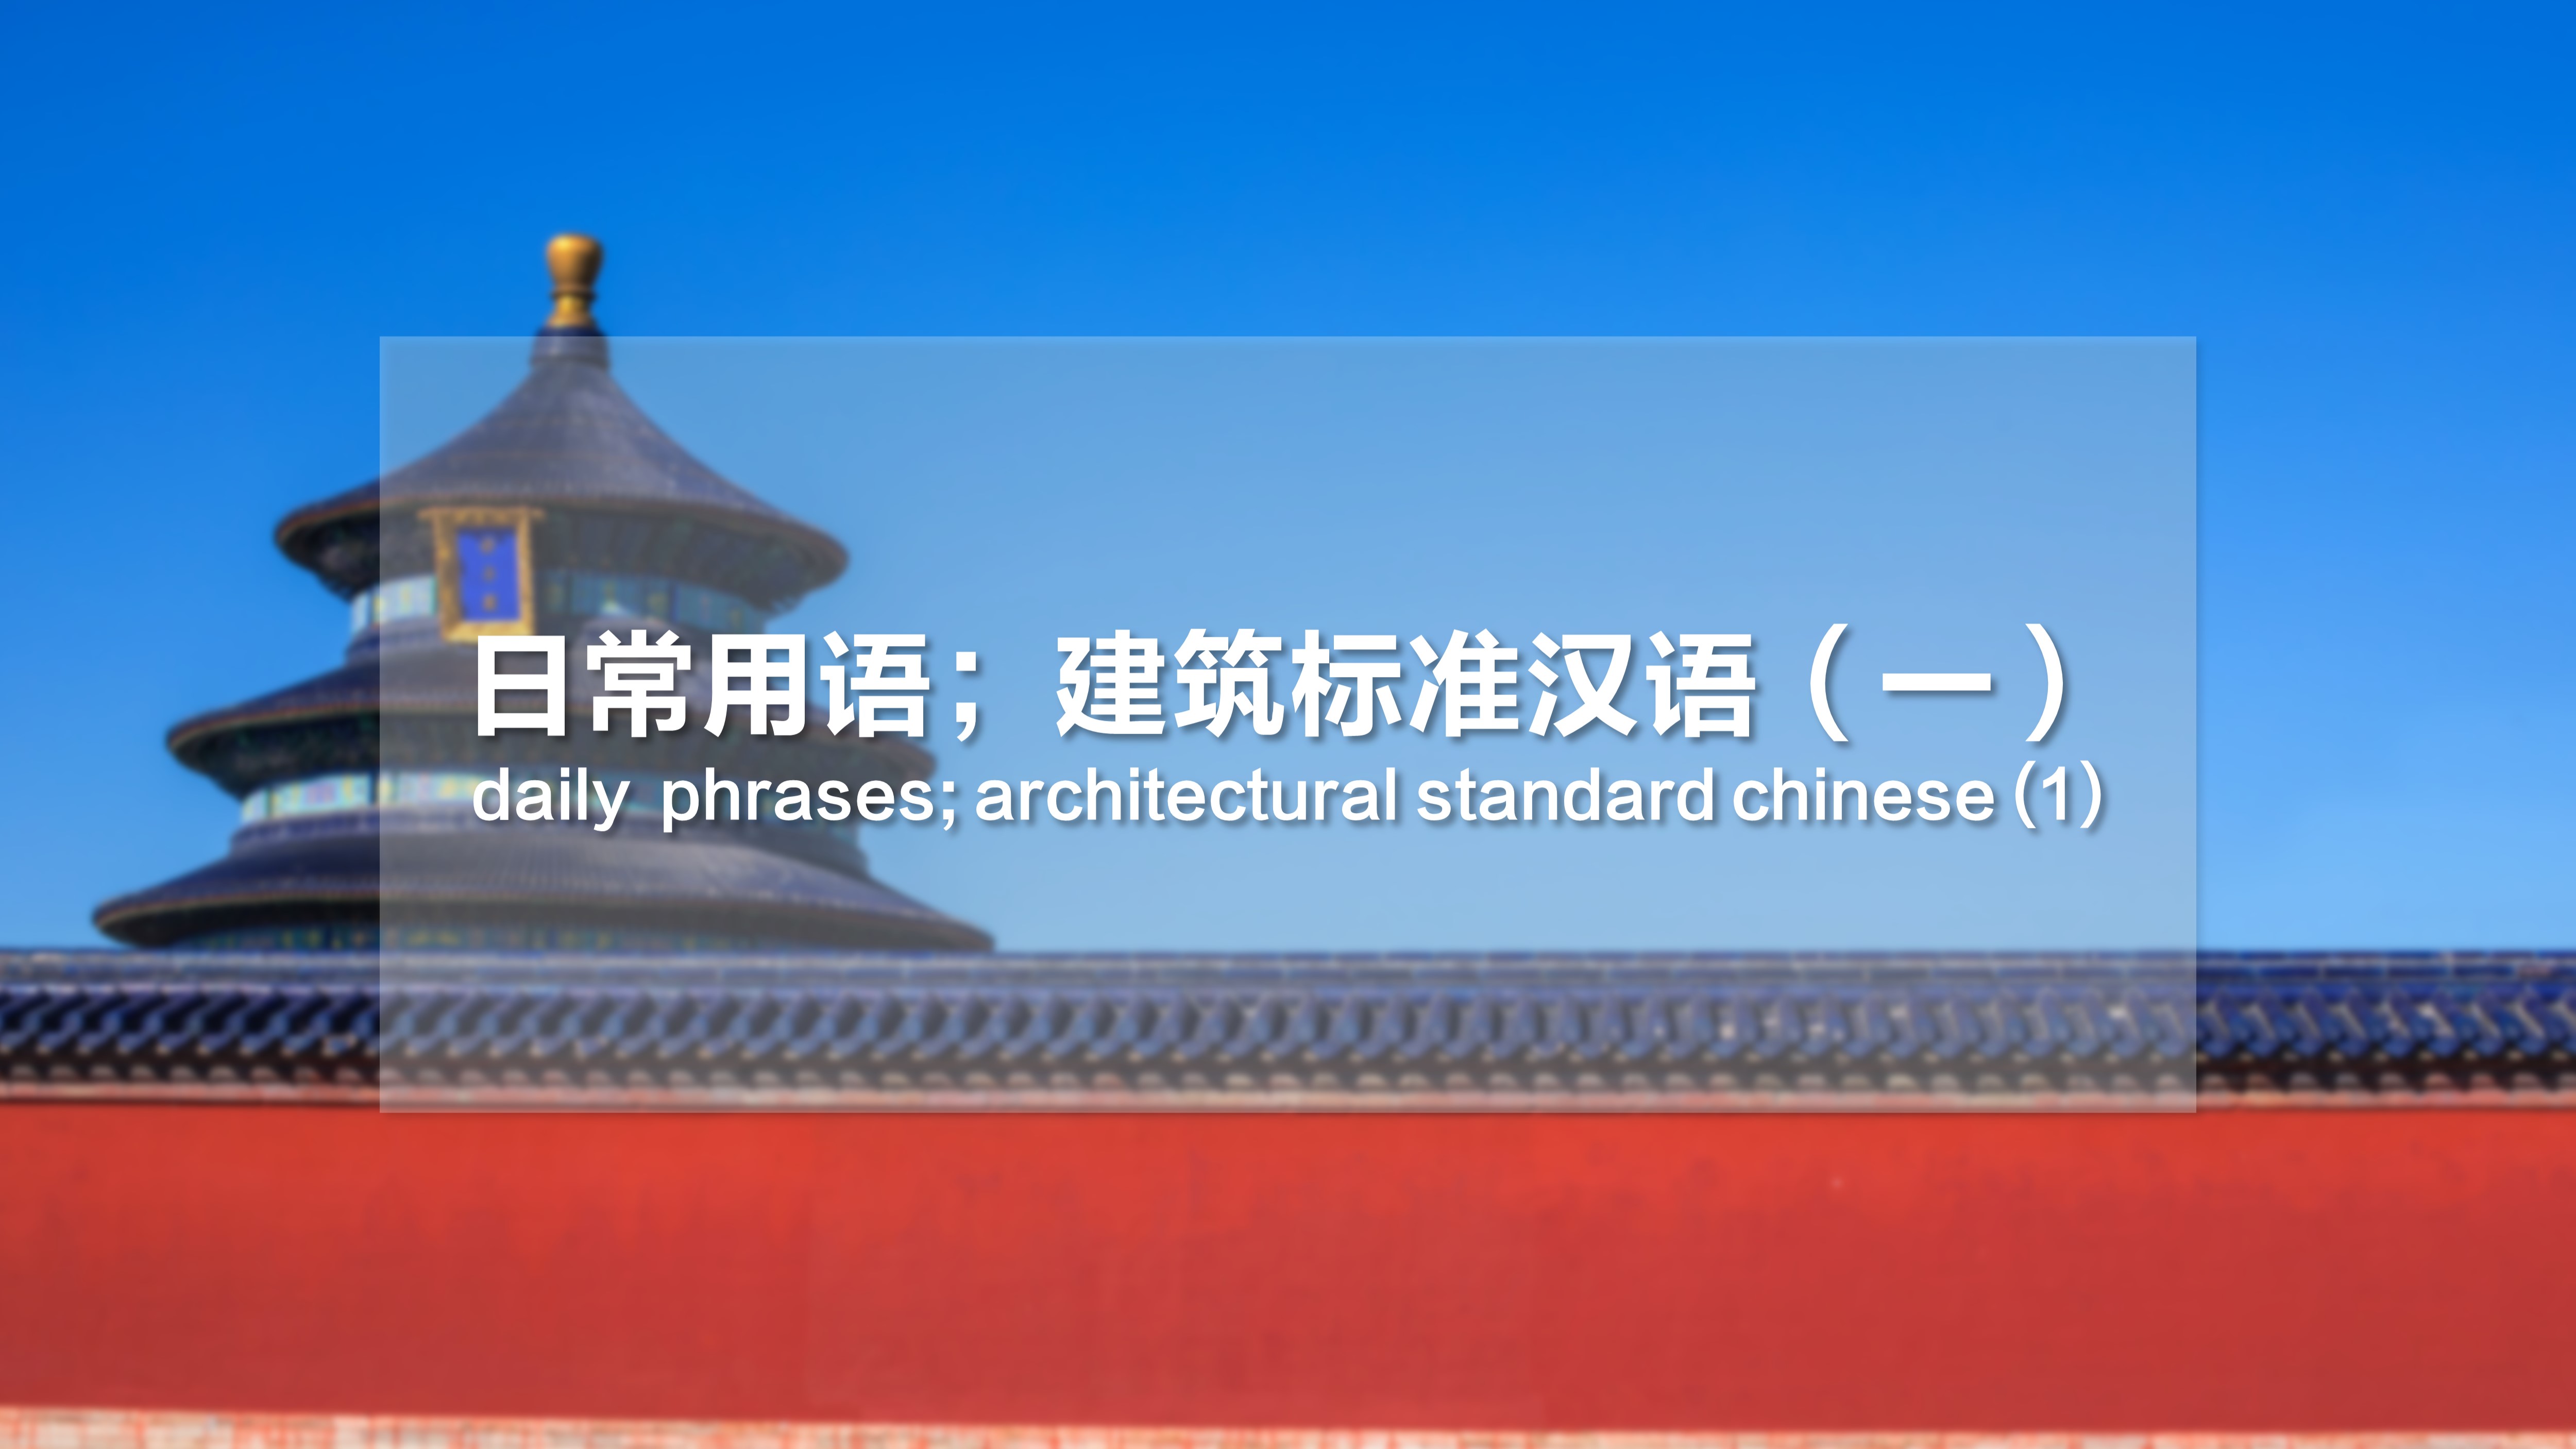 Daily  Phrases; Architectural Standard Chinese (1)